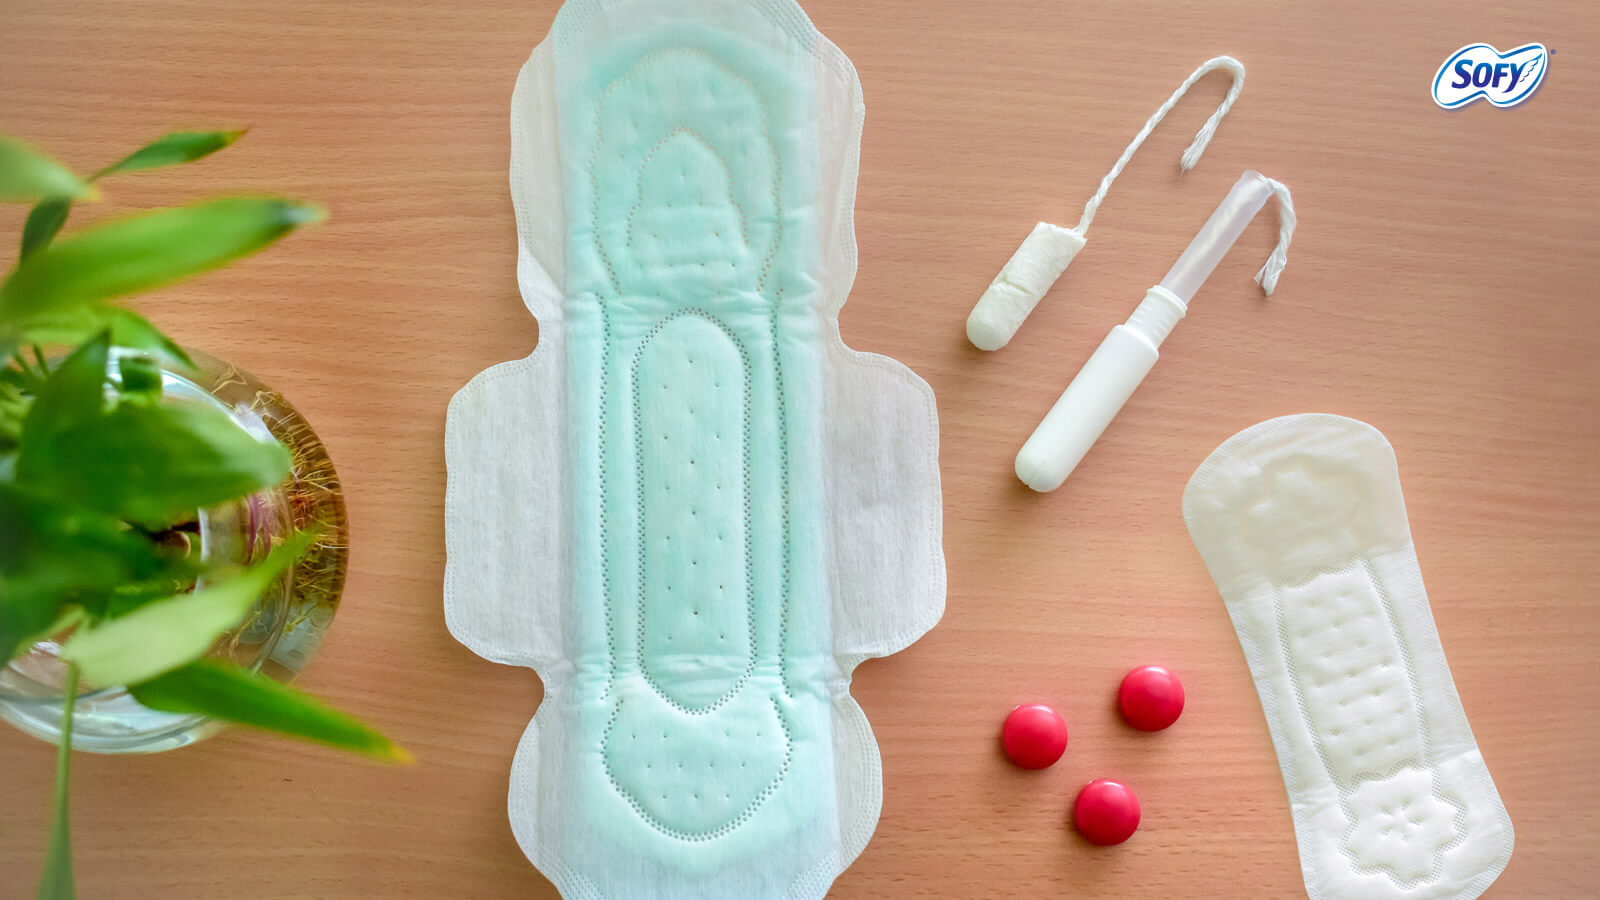 Women periods and menstrual hygiene product